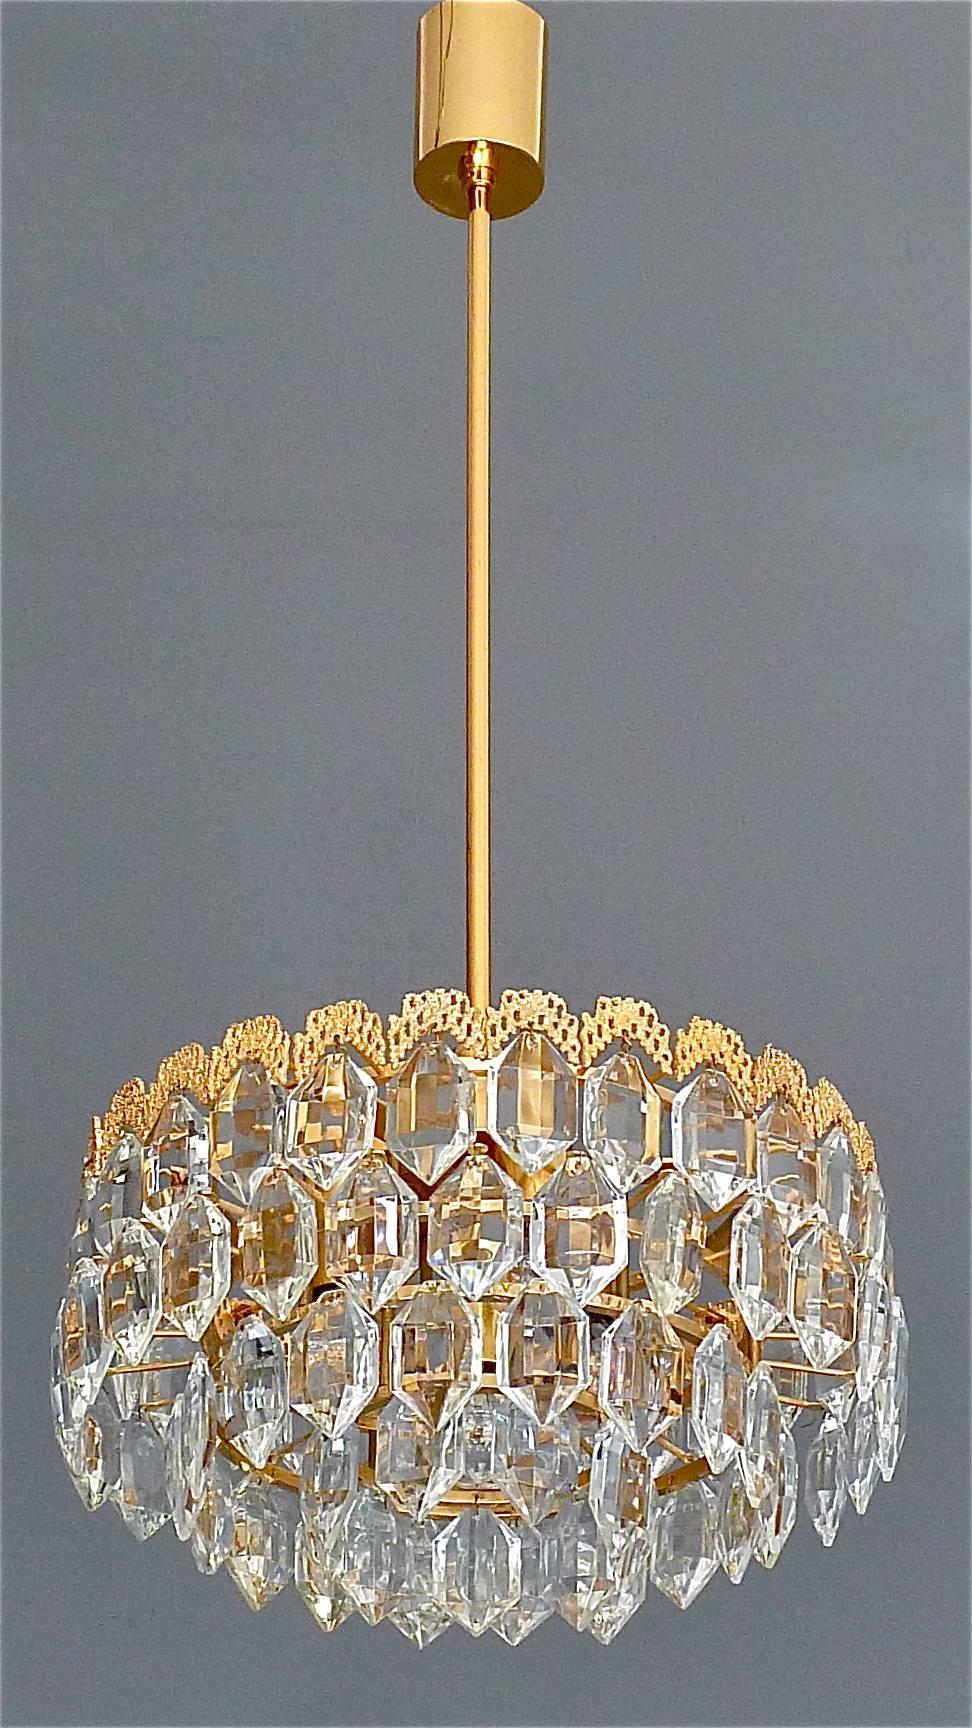 Precious gilt brass and crystal glass chandelier made by the famous company Bakalowits, Austria circa 1960s. The ceiling fixture and the frame are made of gilt brass with a wonderful gilt decoration on top of the upper frame which looks like a